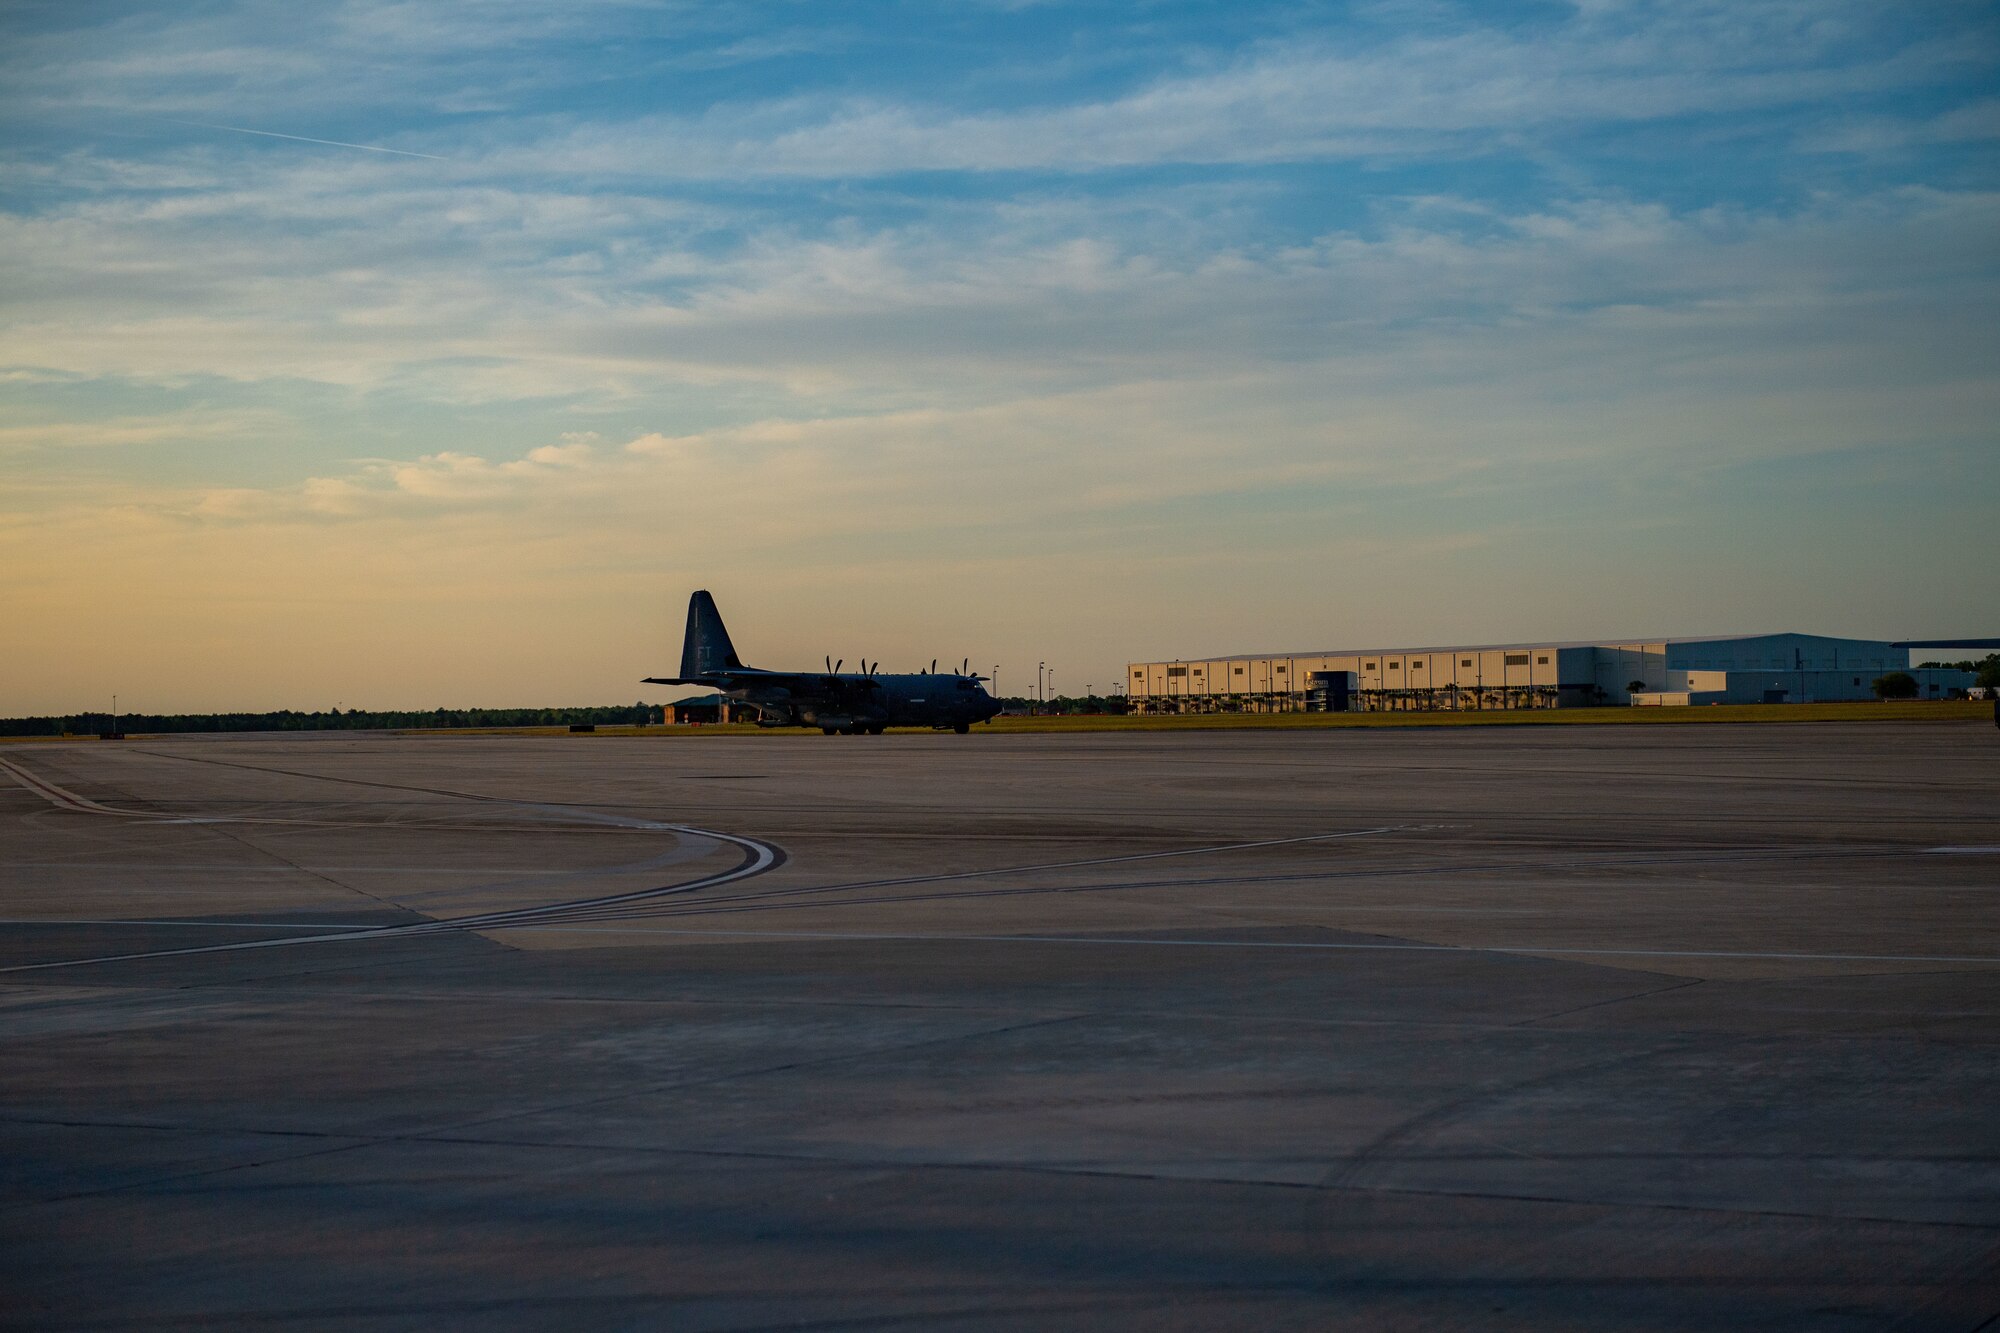 An HC-130J Combat King II assigned to the 71st Rescue Squadron taxis down the runway during Exercise Ready Tiger 24-1 at Savannah Air National Guard Base, Georgia, April 8, 2024. Ready Tiger 24-1 serves as a steppingstone to prepare for Agile Flag, an Air Force Force Generation certifying exercise, later this year. Built upon Air Combat Command's directive to assert air power in contested environments, Exercise Ready Tiger 24-1 aims to test and enhance the 23rd Wing’s proficiency in executing Lead Wing and Expeditionary Air Base concepts through Agile Combat Employment and command and control operations. (U.S. Air Force photo by Senior Airman Courtney Sebastianelli)